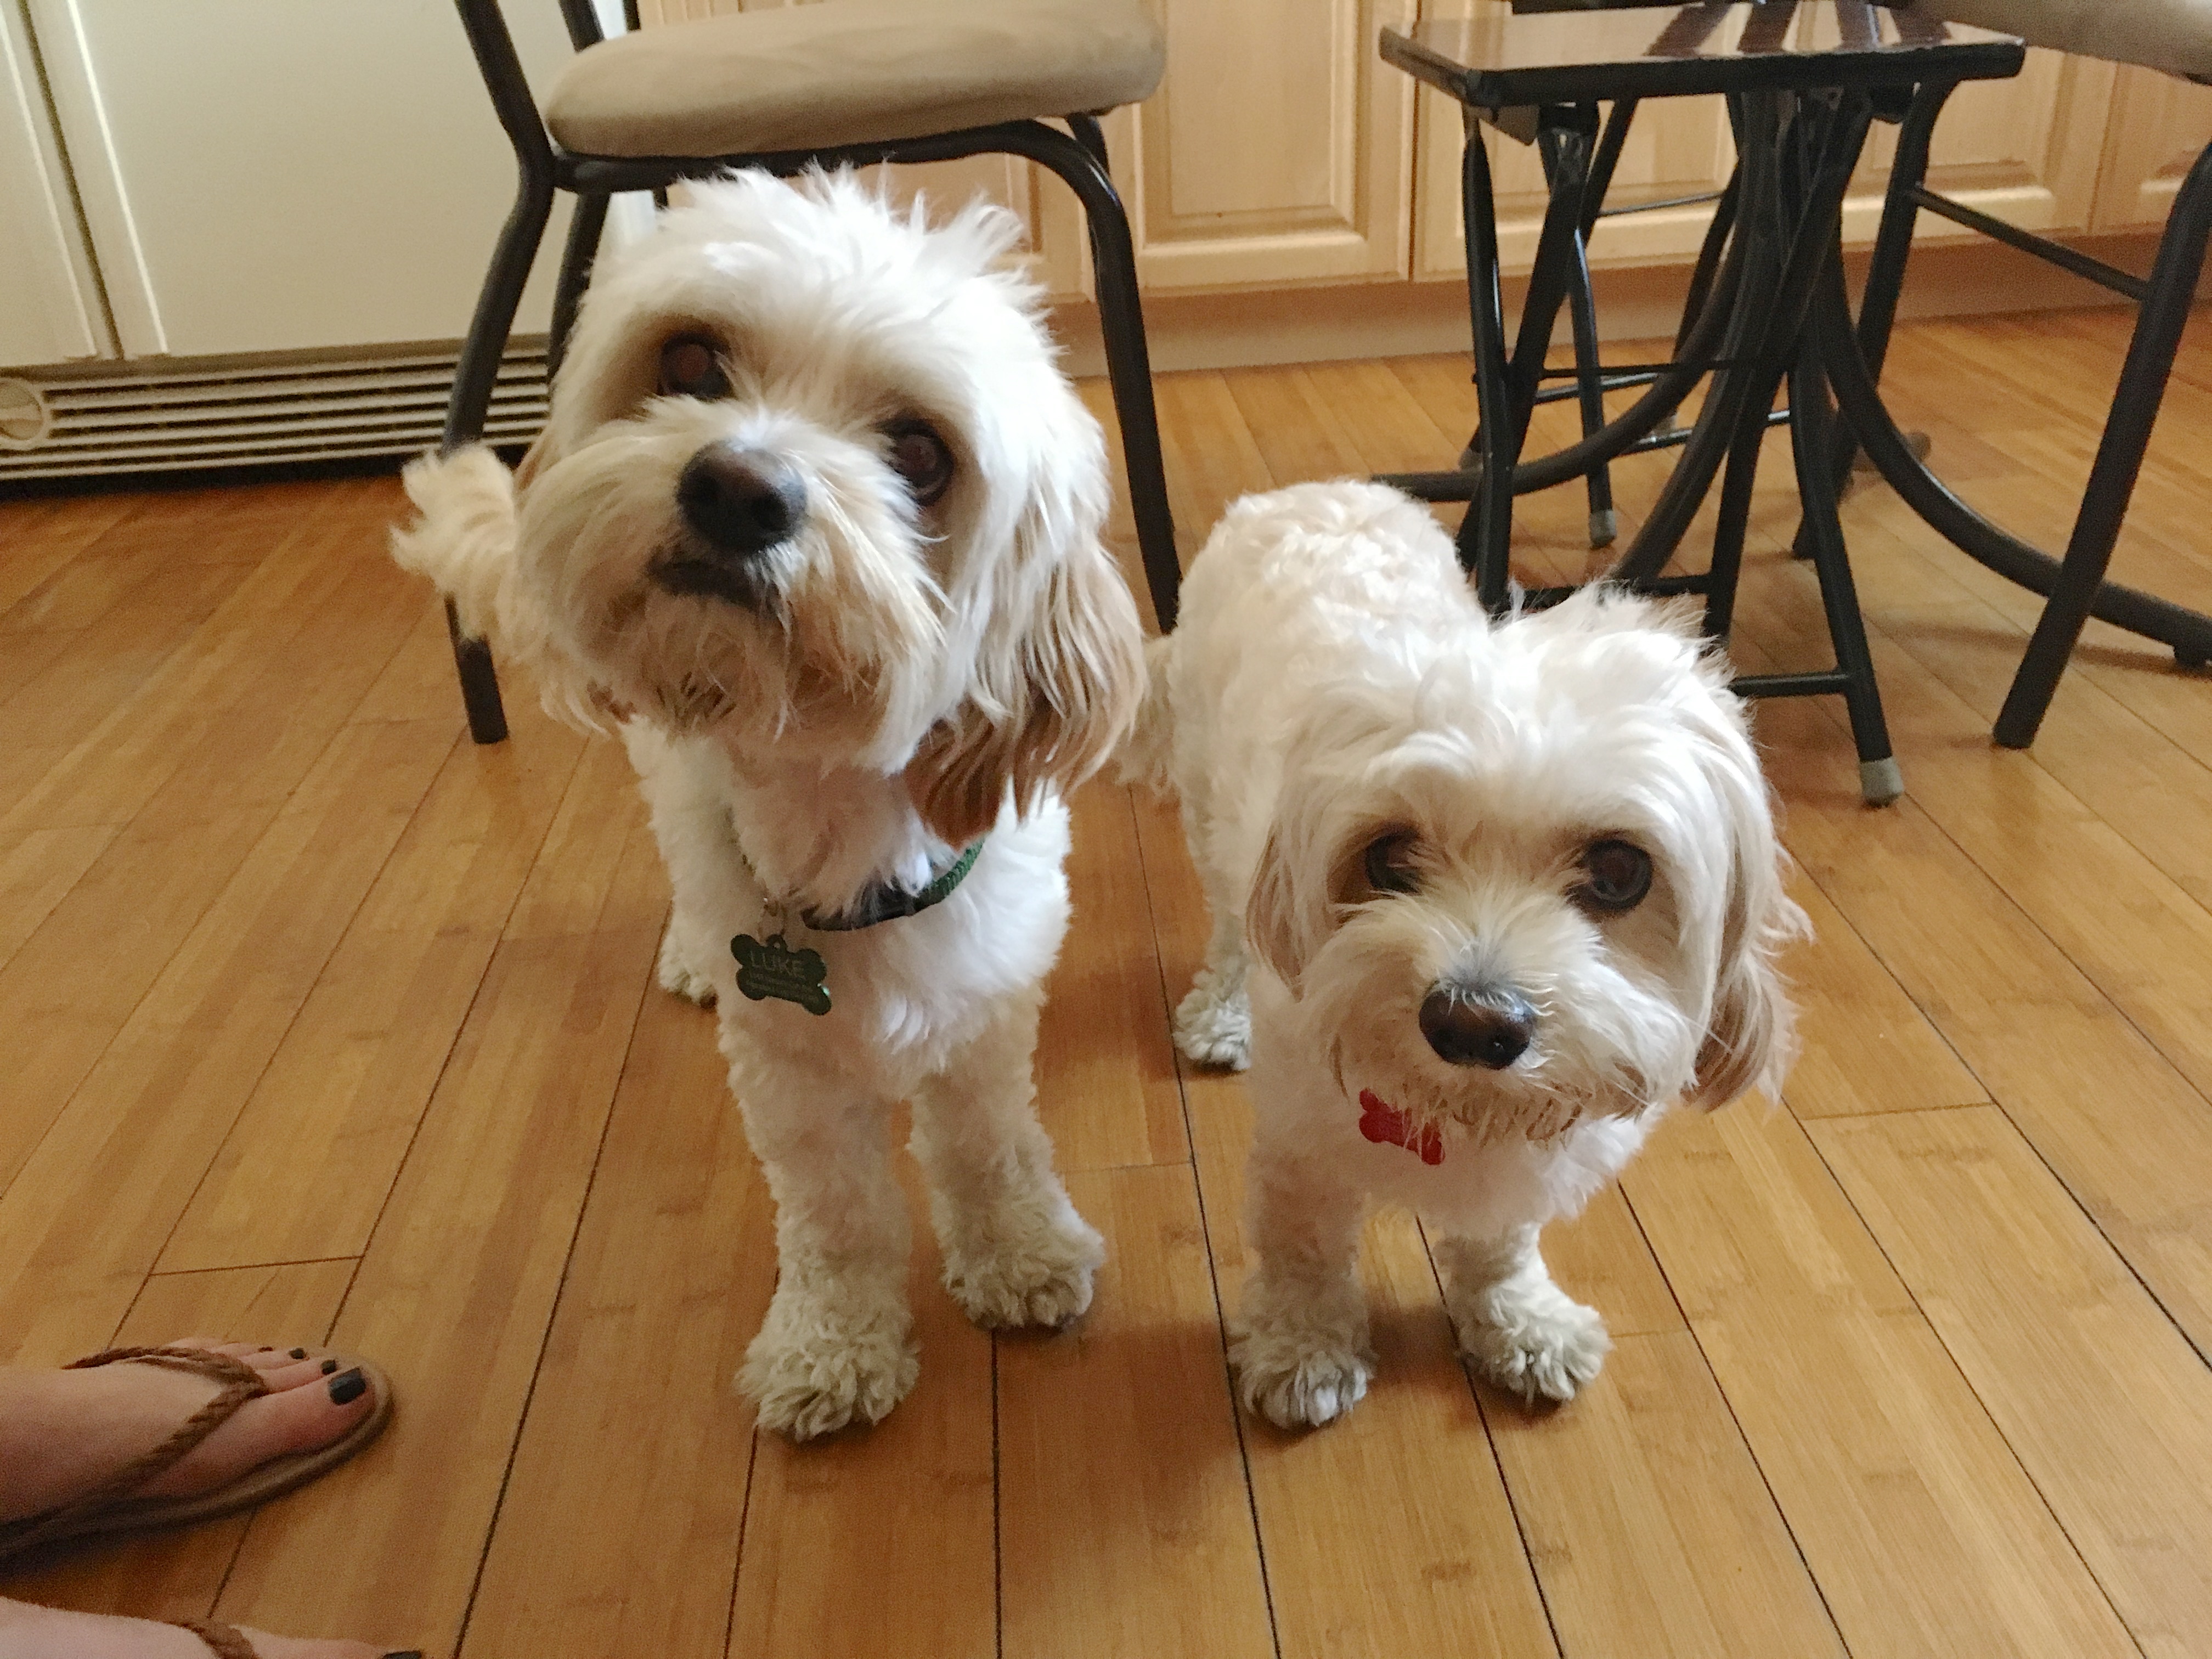 Pair of Shih to Respect Their Guardian to Stop Dog Barking: Dog Gone Problems